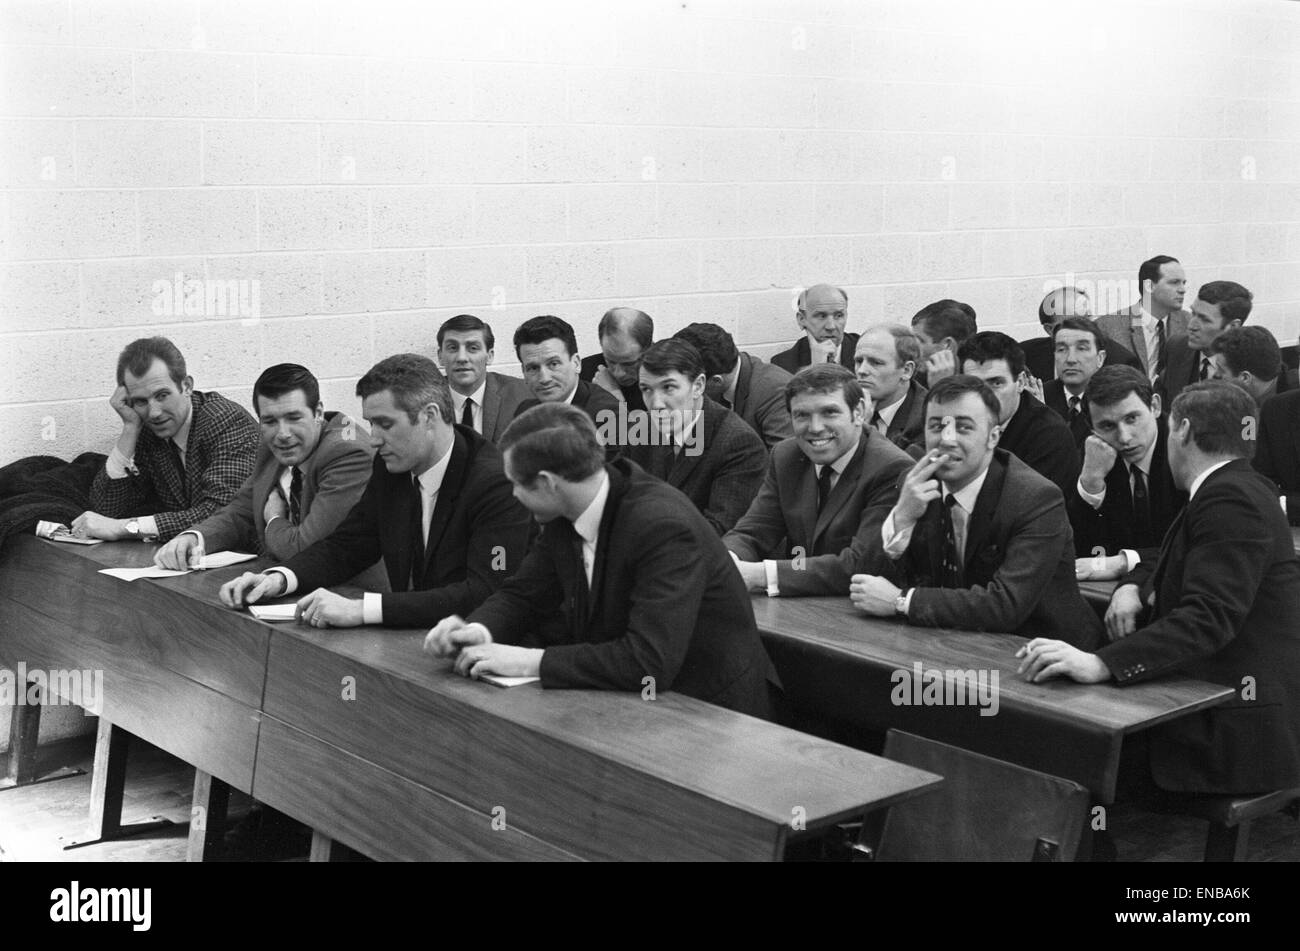 Football Association teach-in at Leeds University with Sheffield United manager John Harris, Leeds manager Don Revie and Johnny Steele of Barnsley. 12th February 1969. Stock Photo